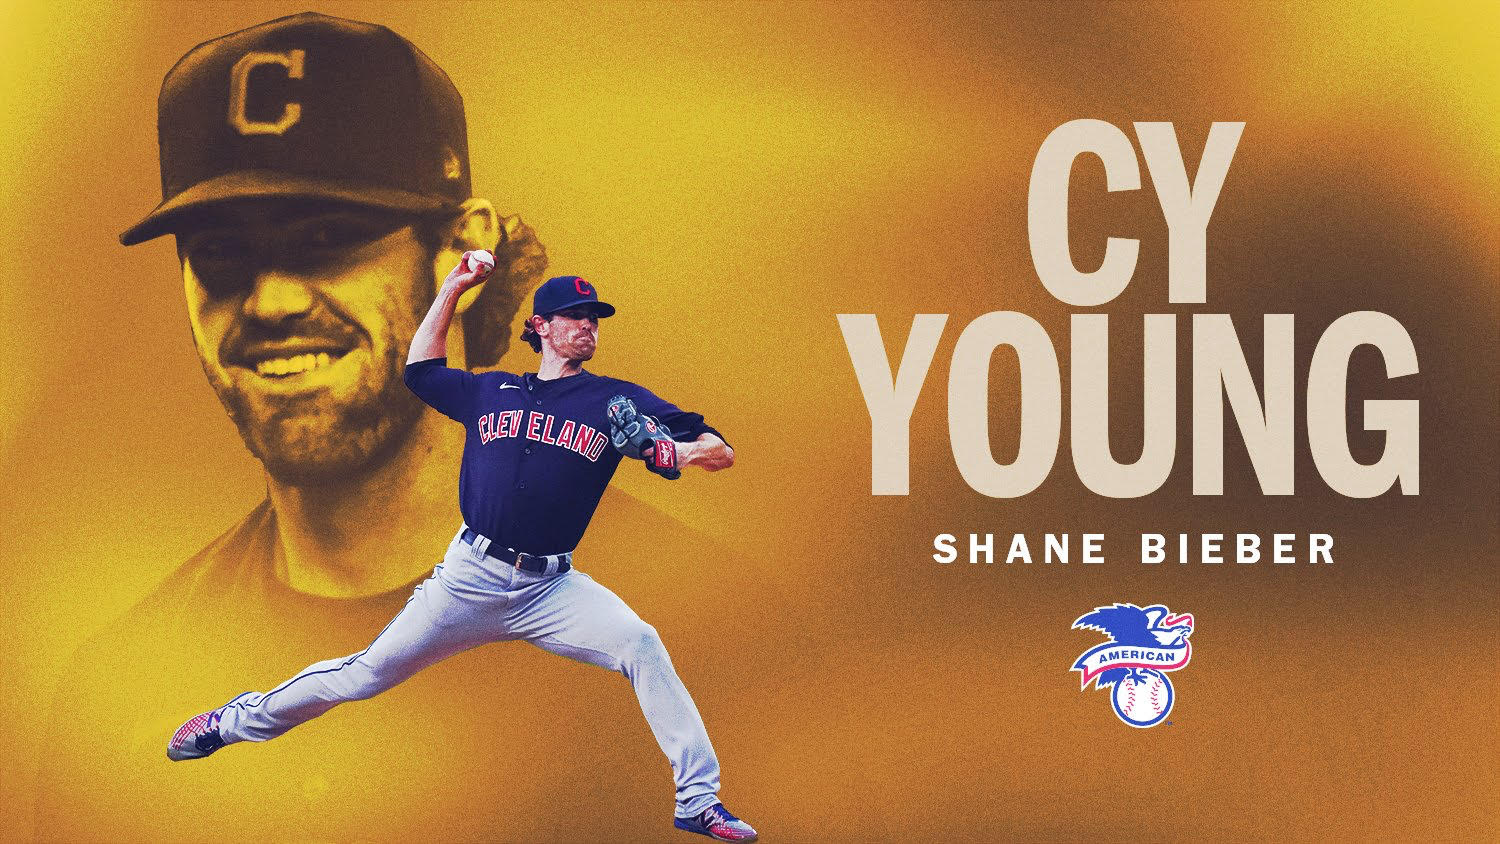 Shane Bieber named MVP after three straight strikeouts; AL wins